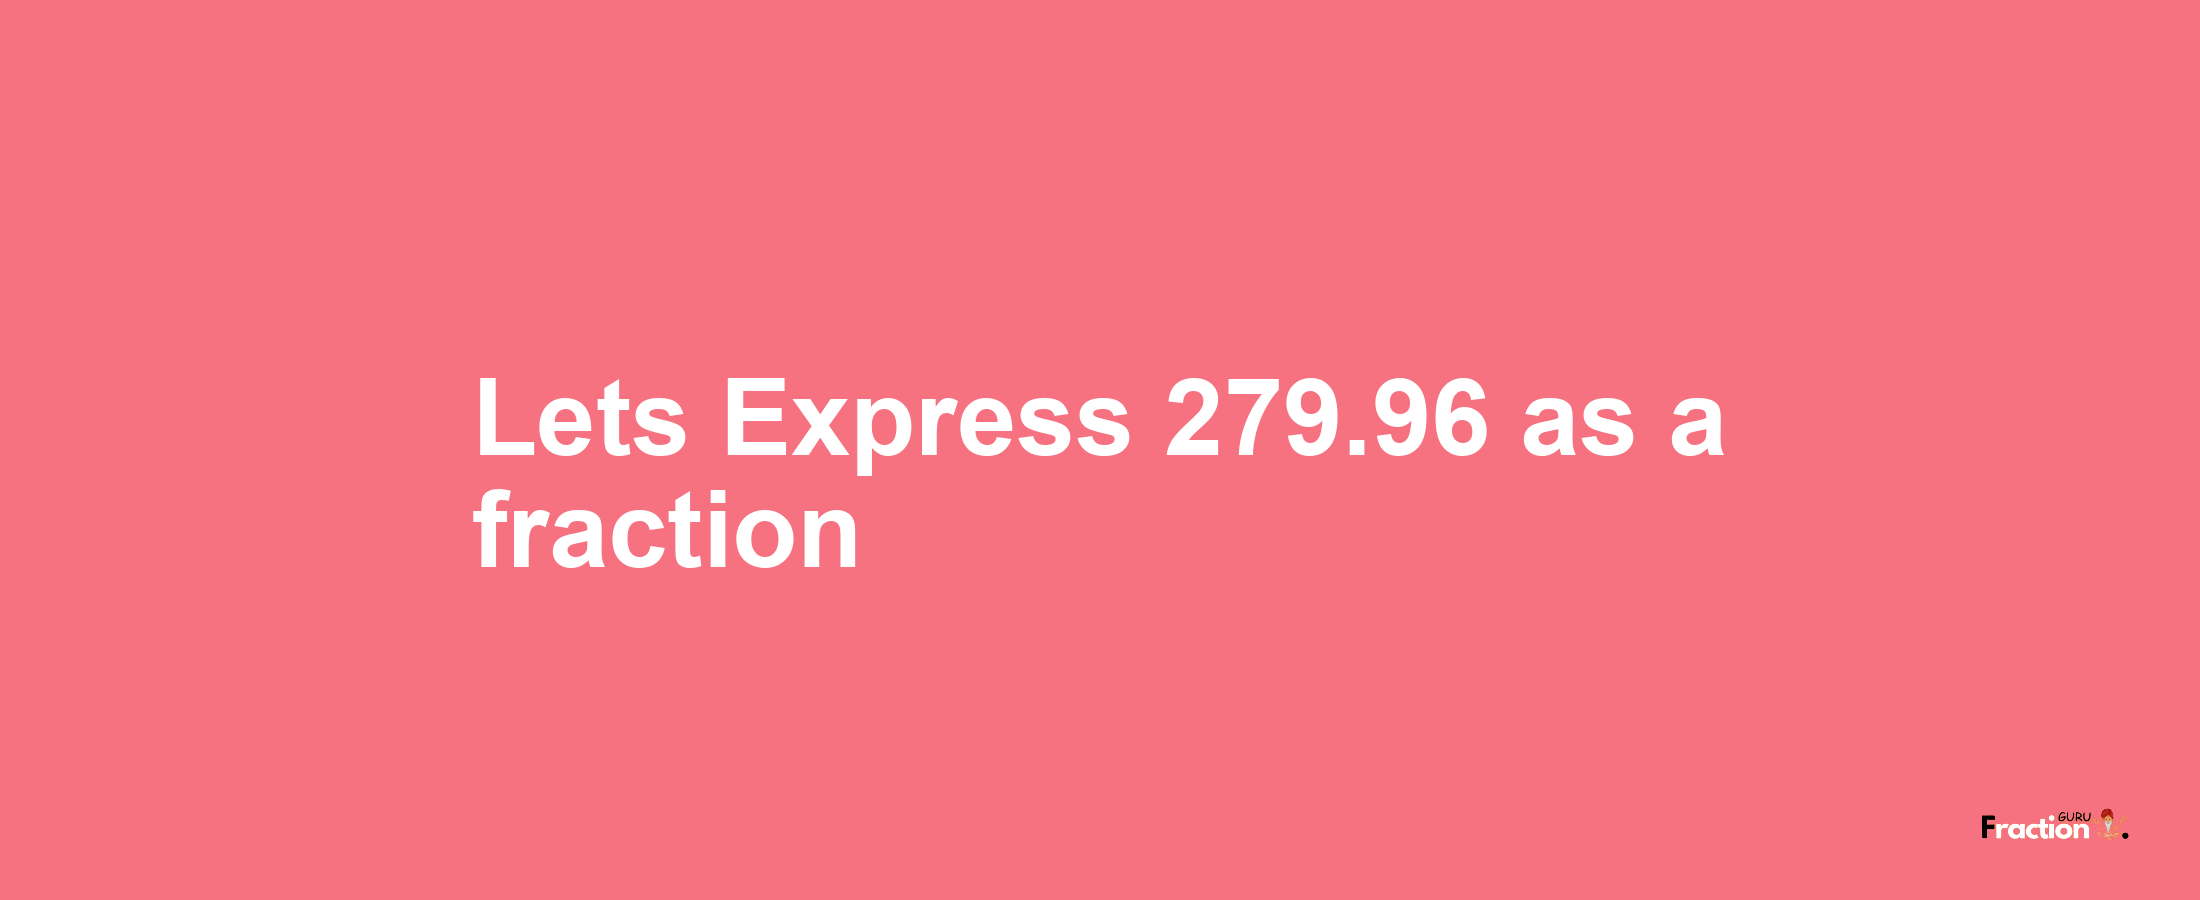 Lets Express 279.96 as afraction